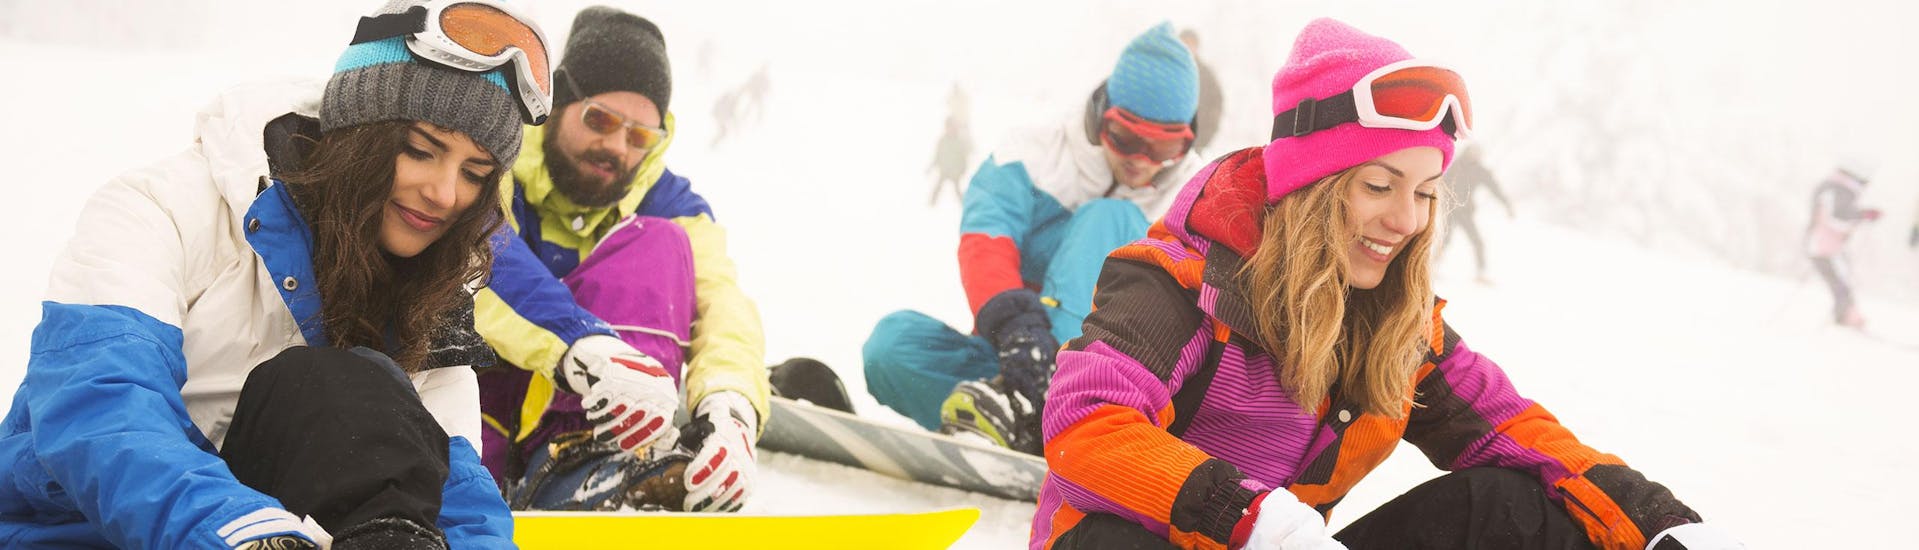 A group of snowboarders strapping on their snowboards during one of the Snowboard Instructor Private - All Ages & Levels  organised by Independent Snowboard School.